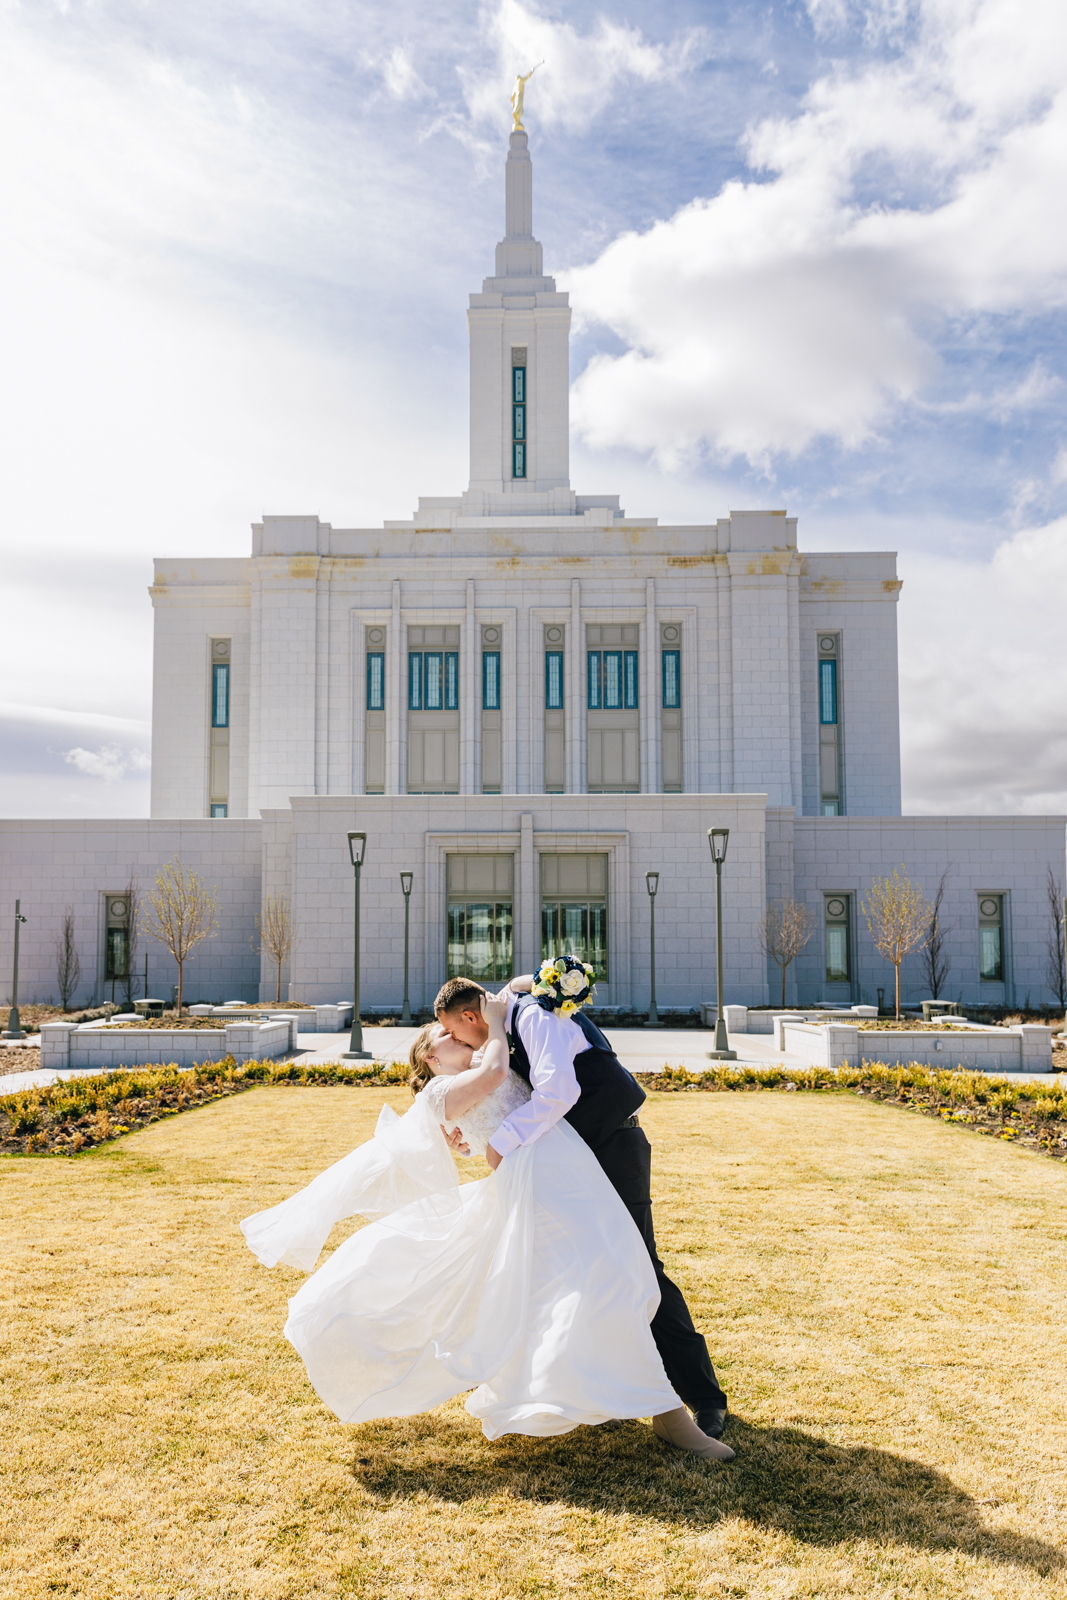 Jackson Hole wedding photographer captures bride and groom kissing in front of temple